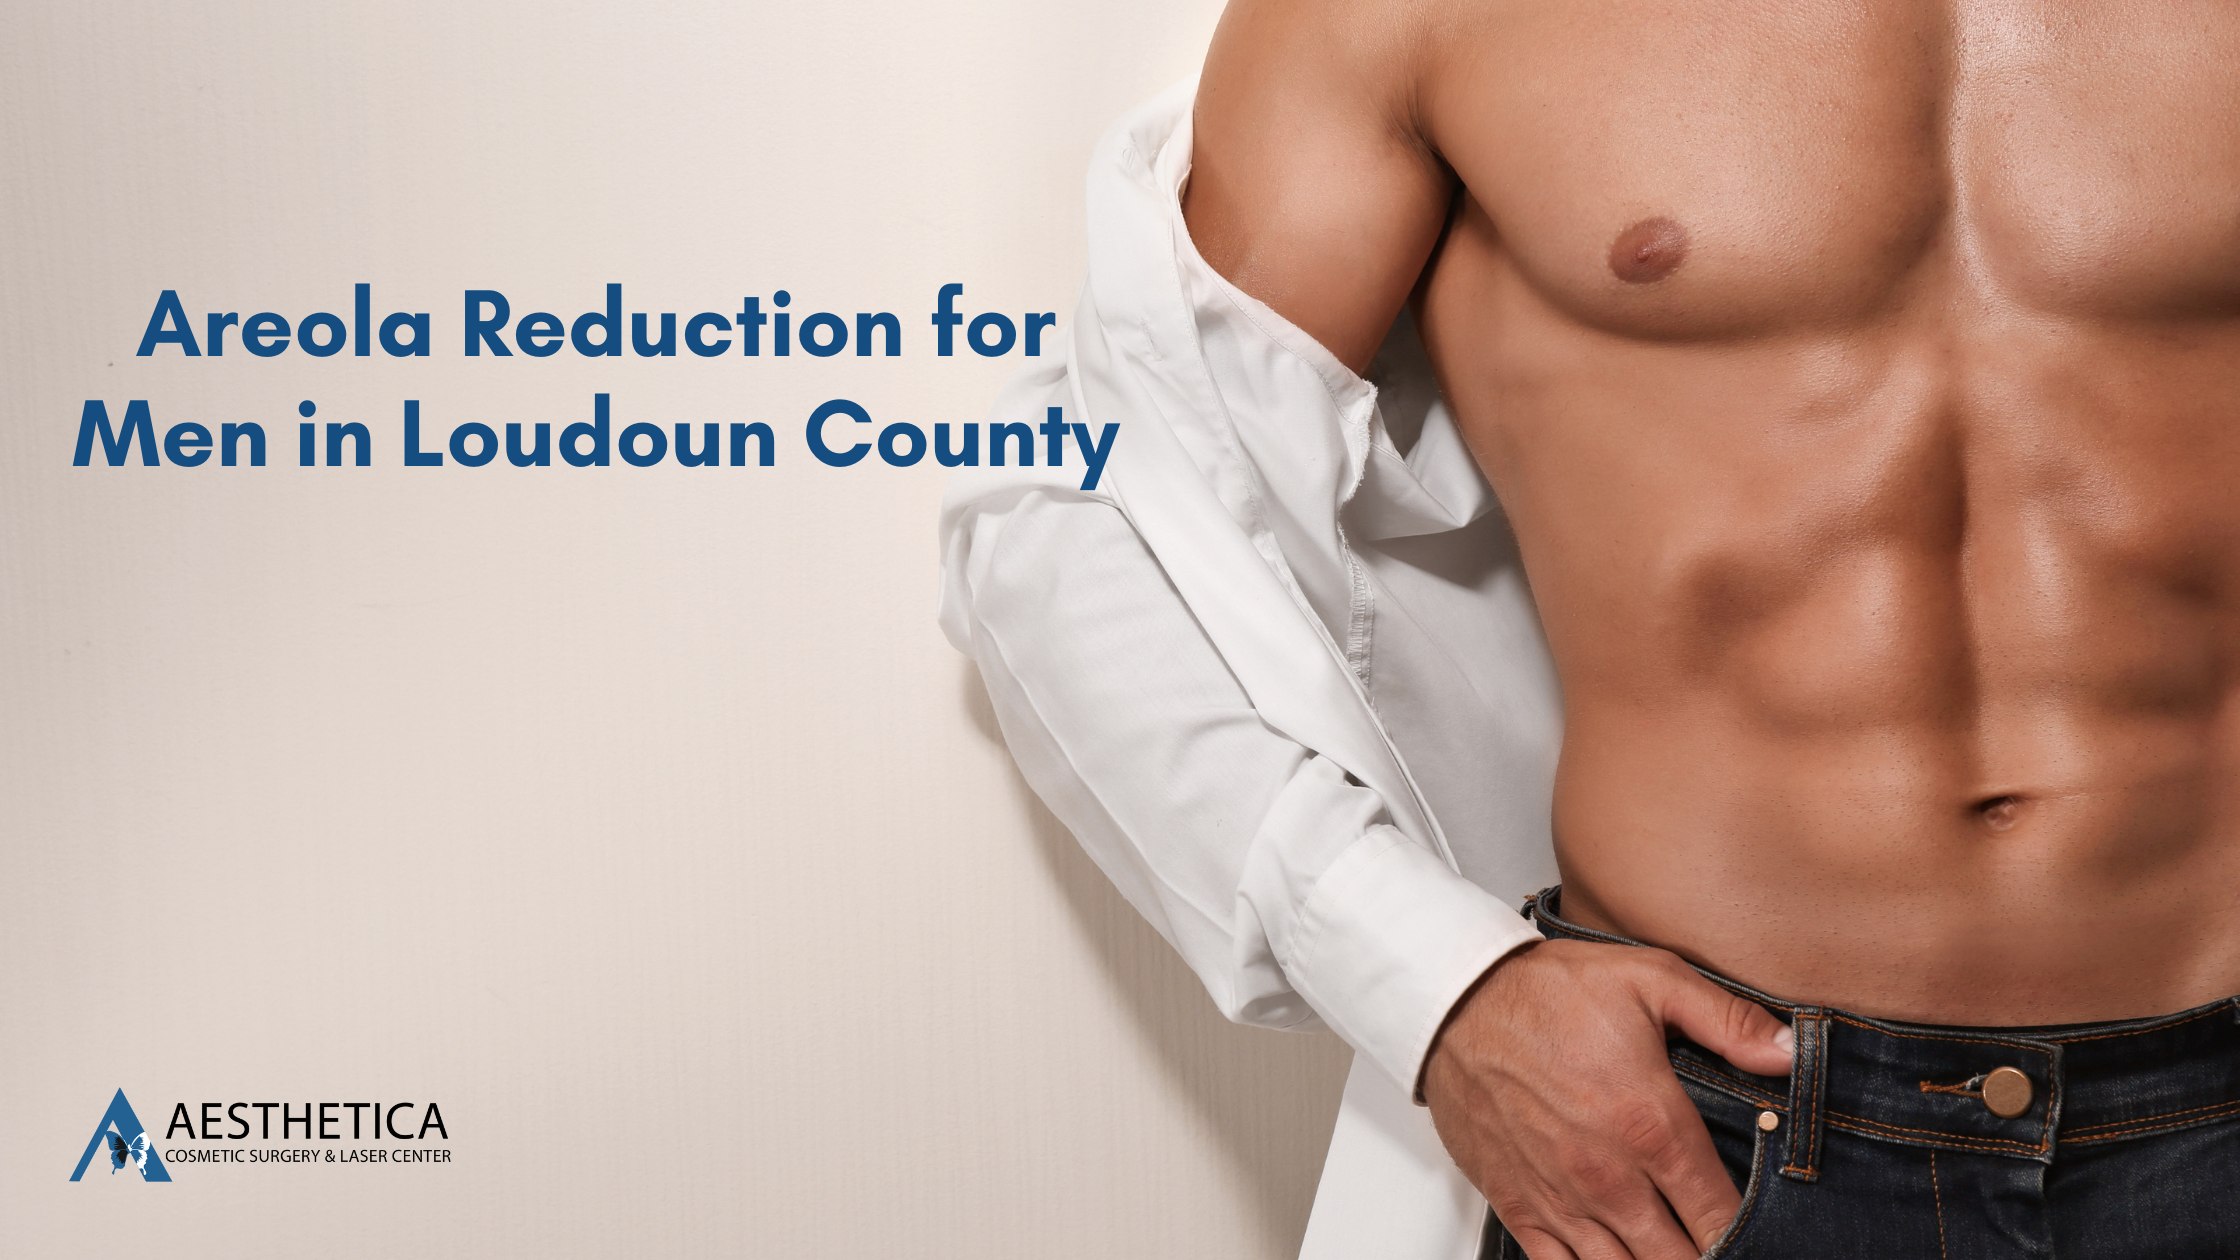 Areola Reduction for Men in Loudoun County